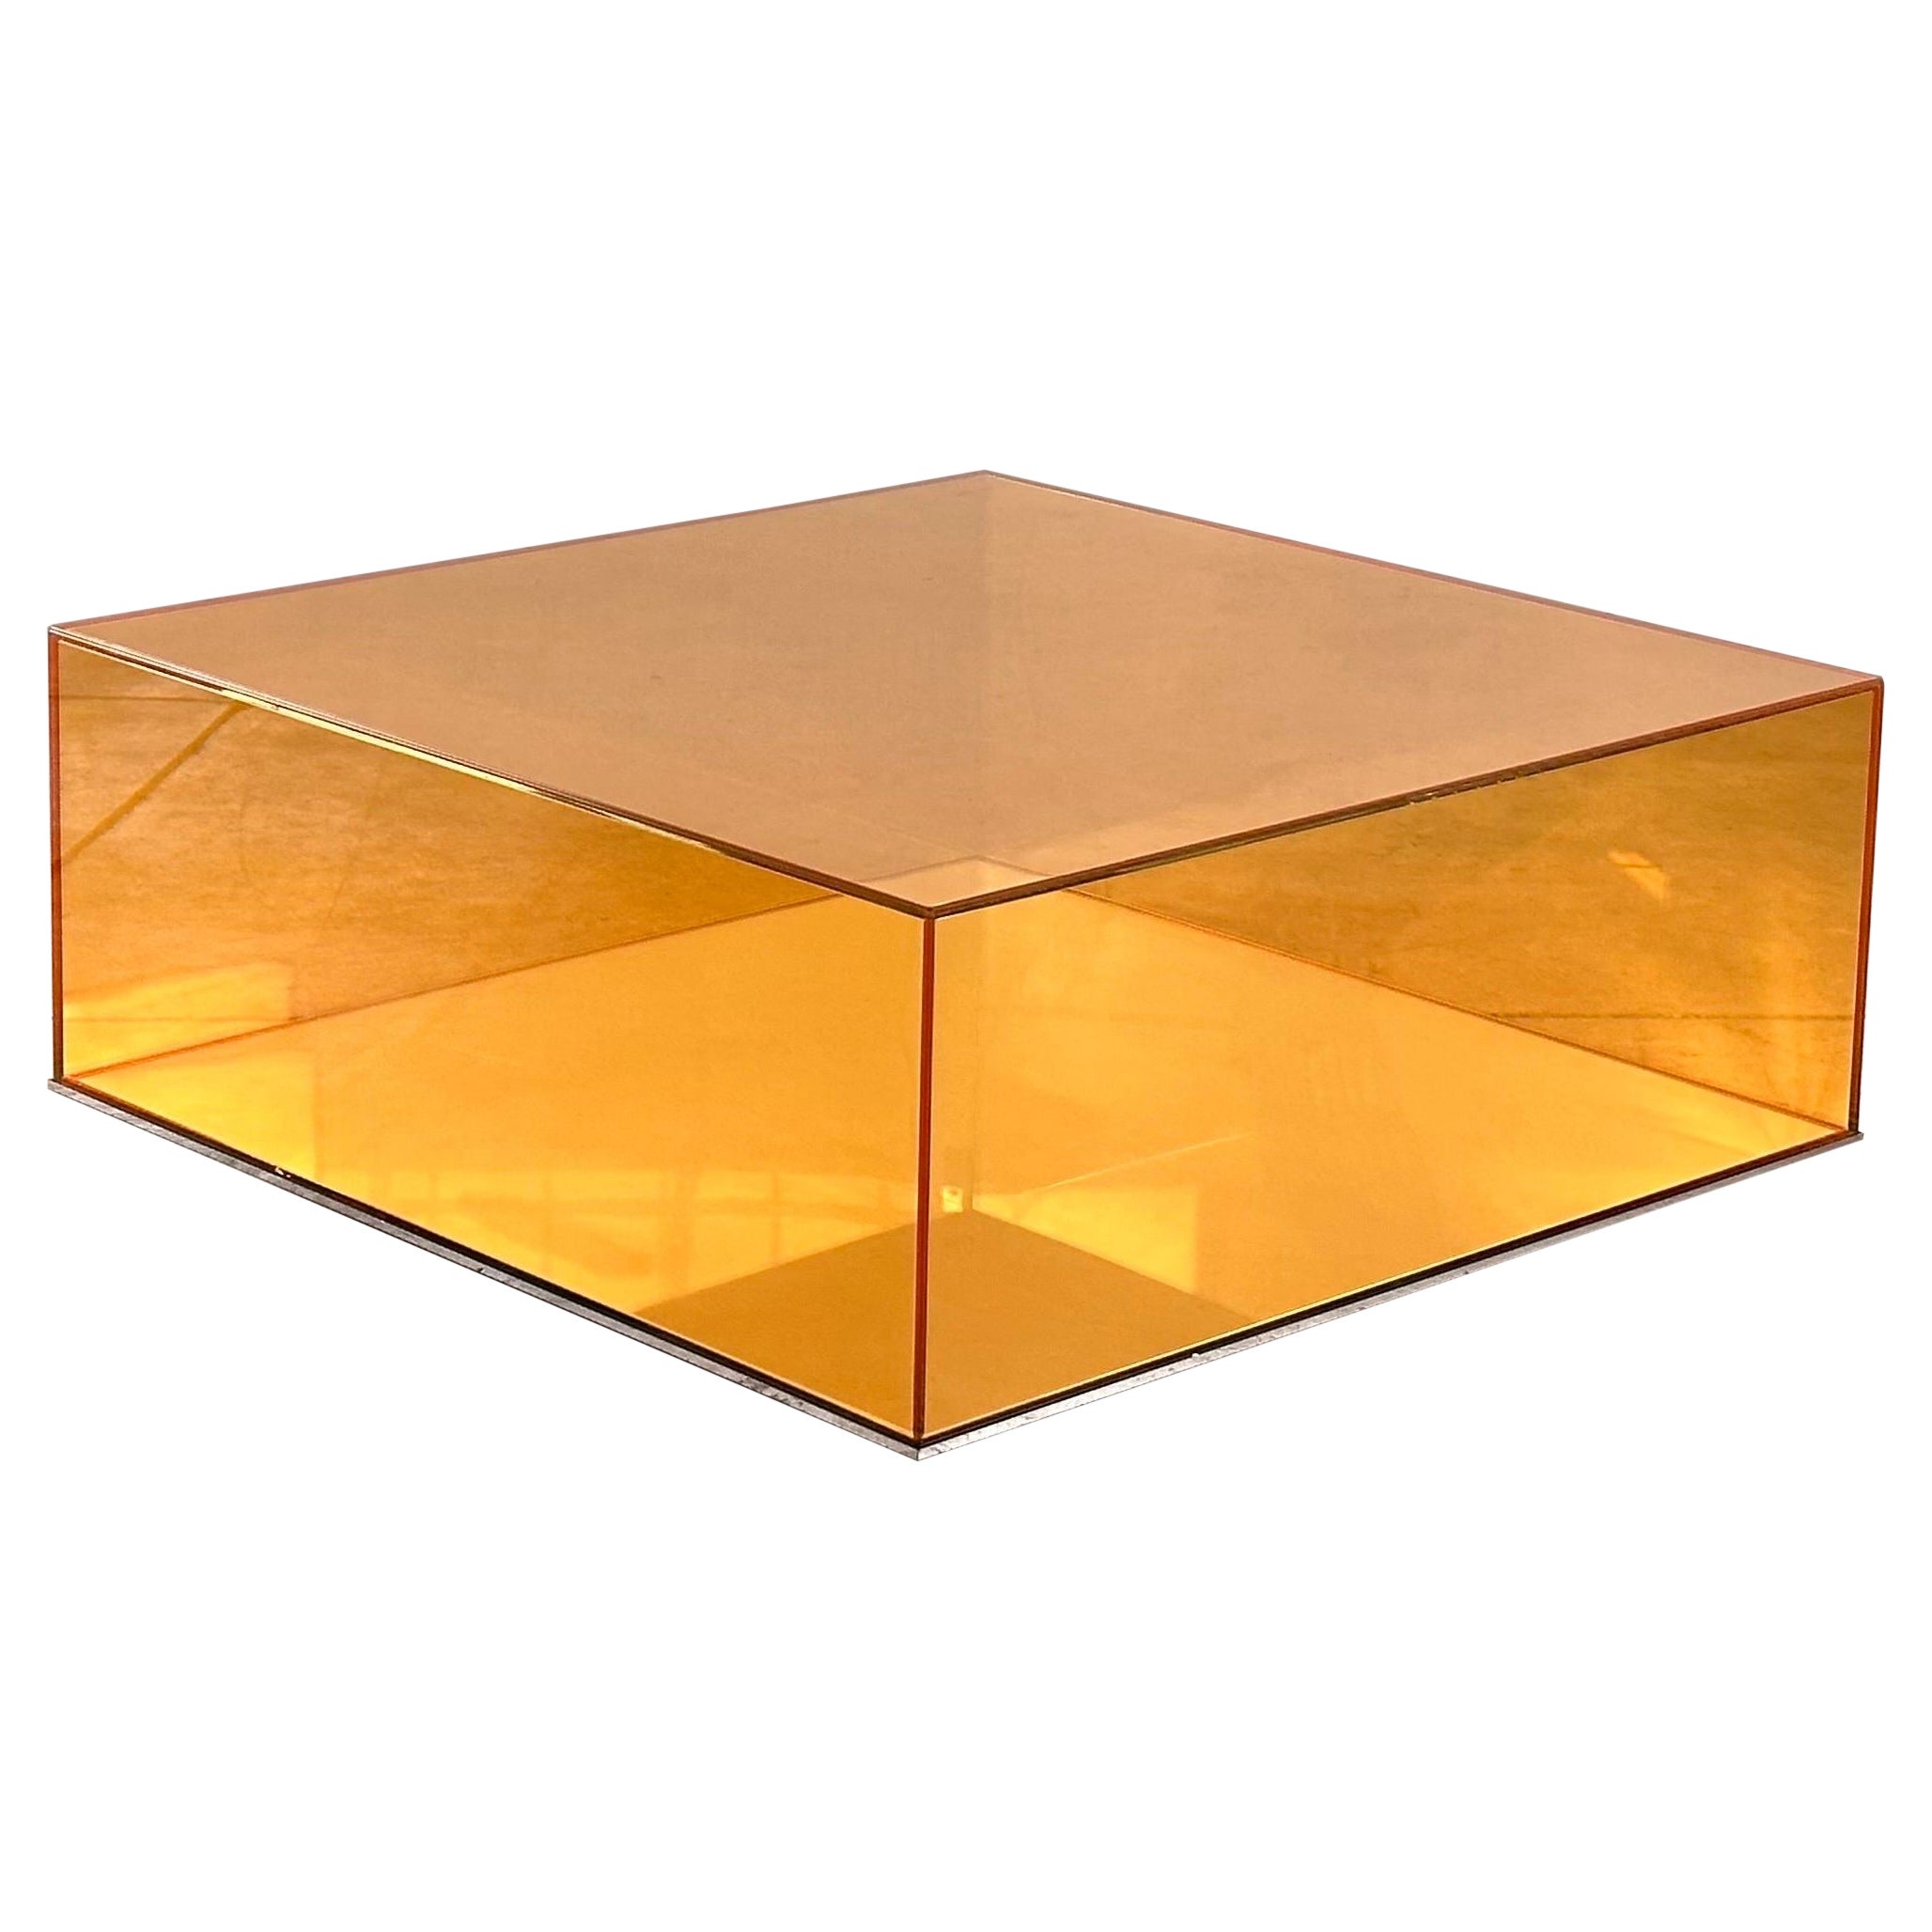 Exquisite "Donald" Stained Glass Coffee Table by Philippe Starck for Glas Italia